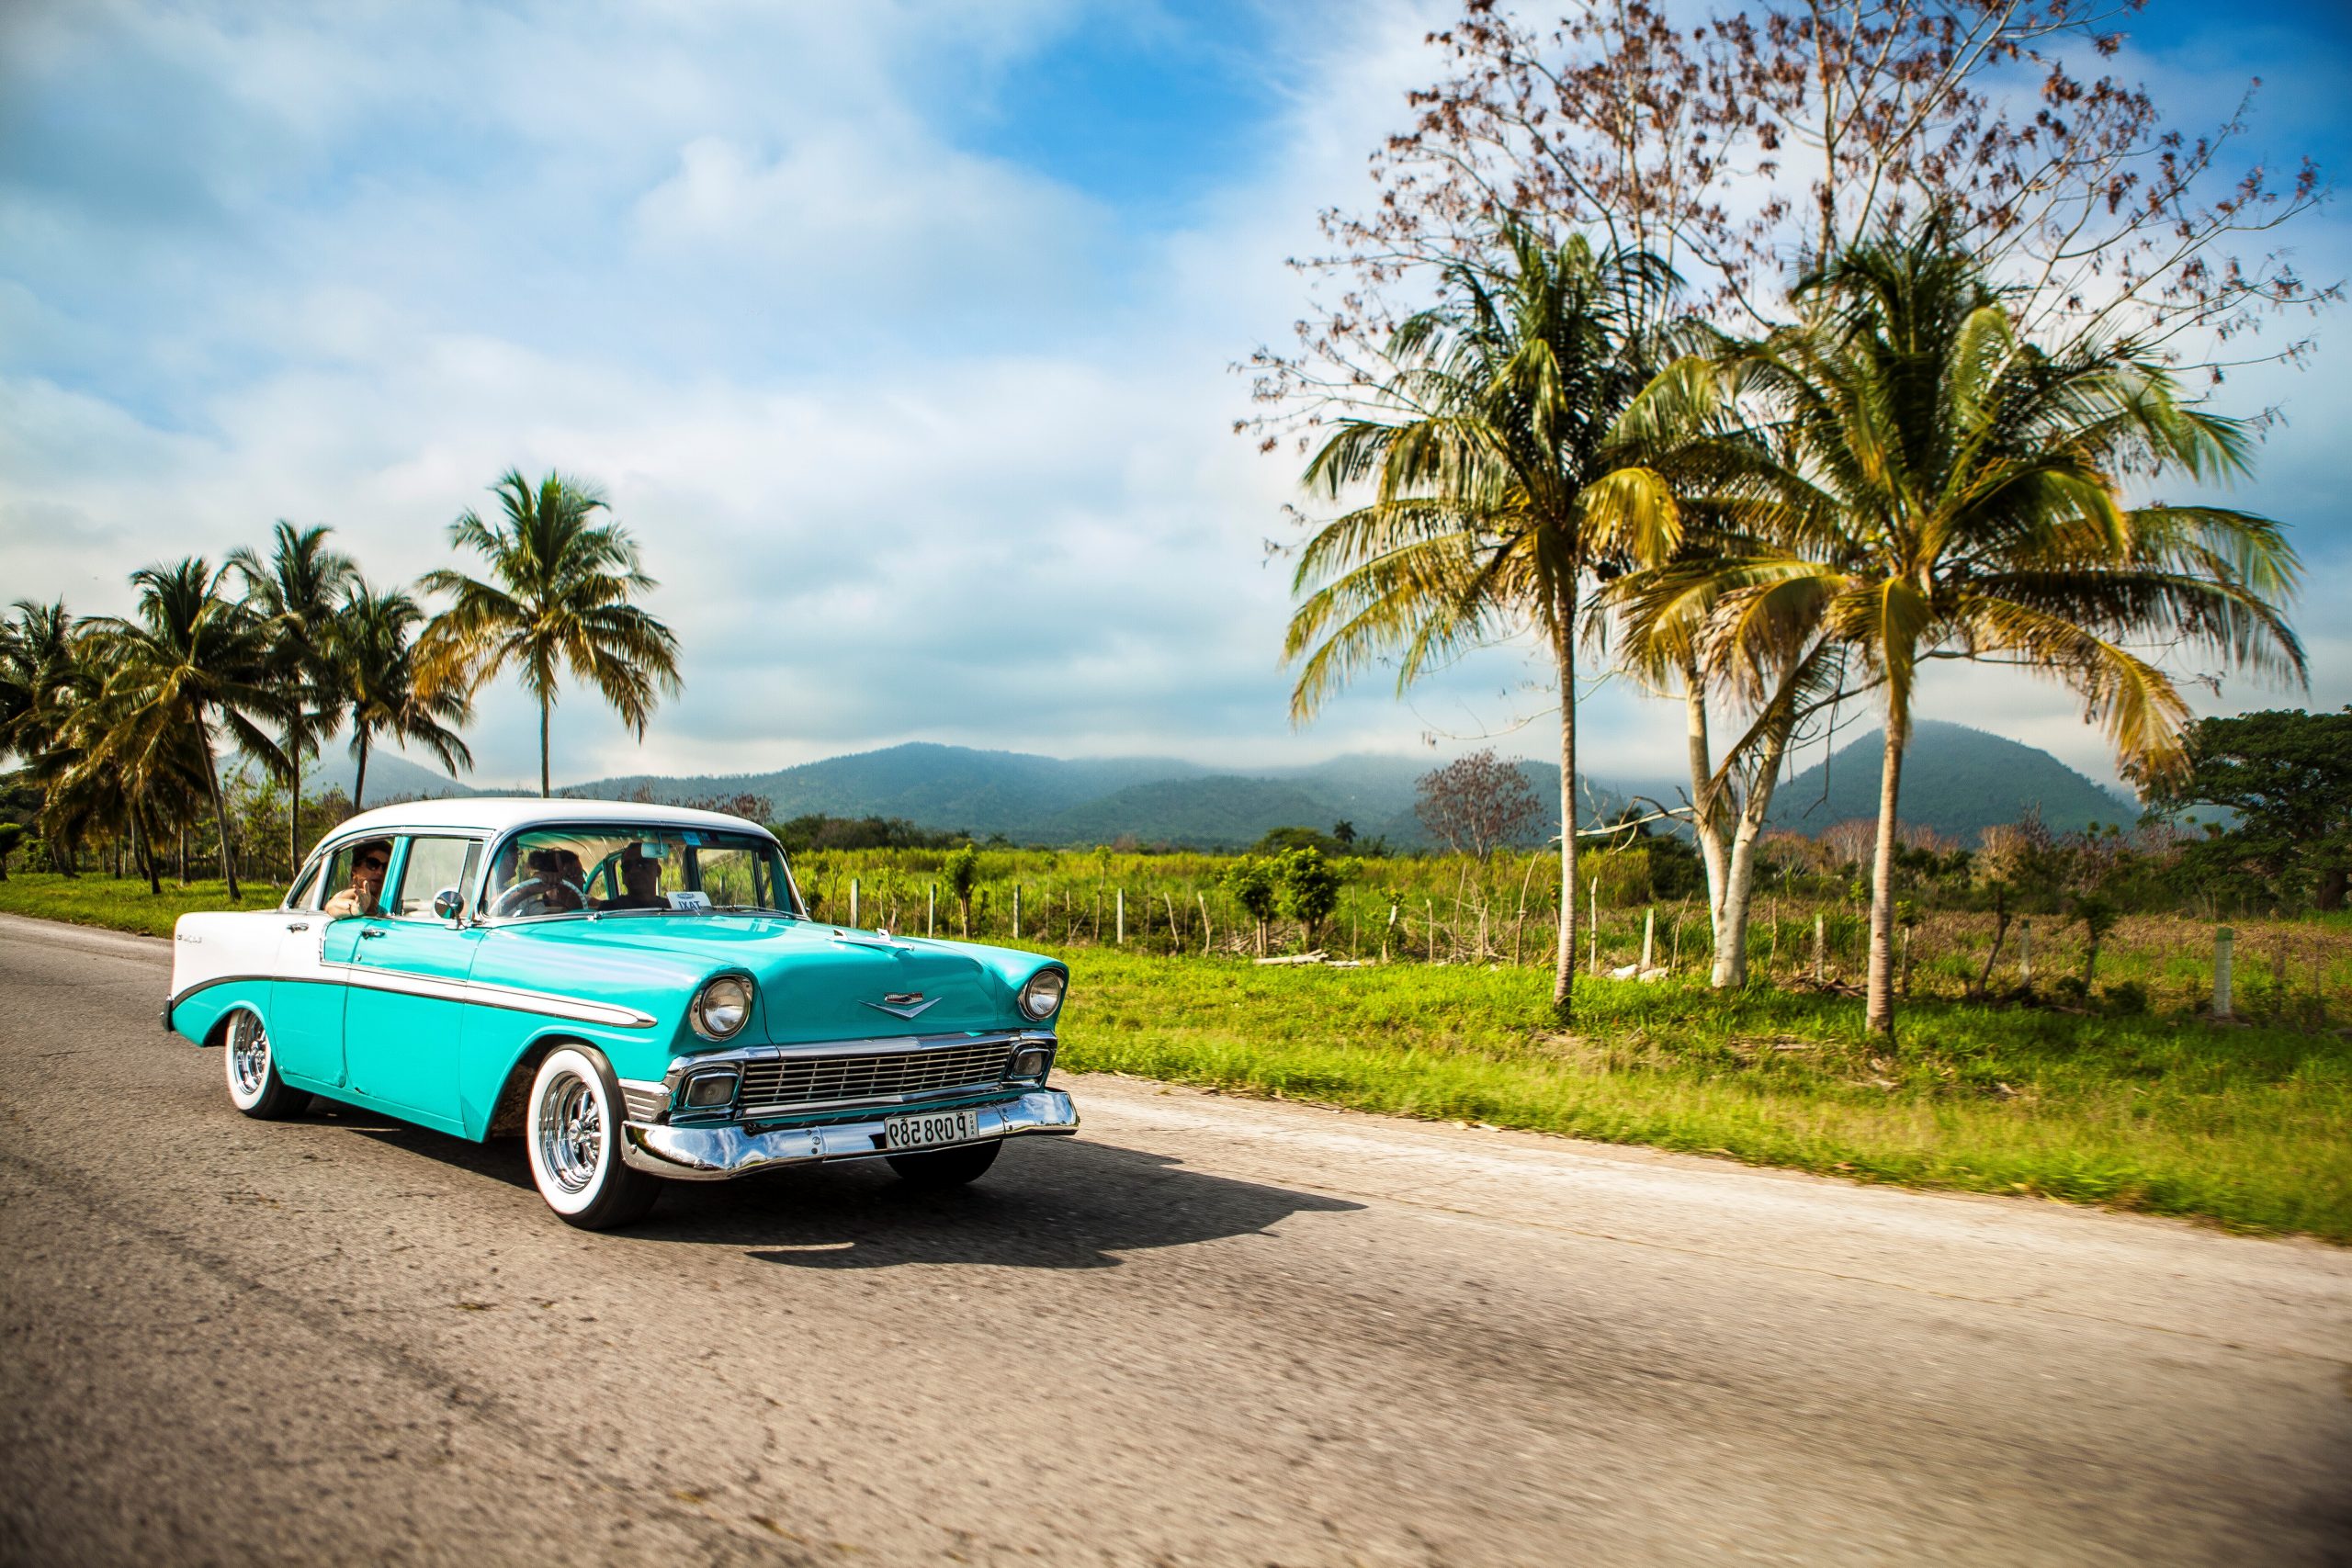 Cuba: sustainable tourism for heritage?